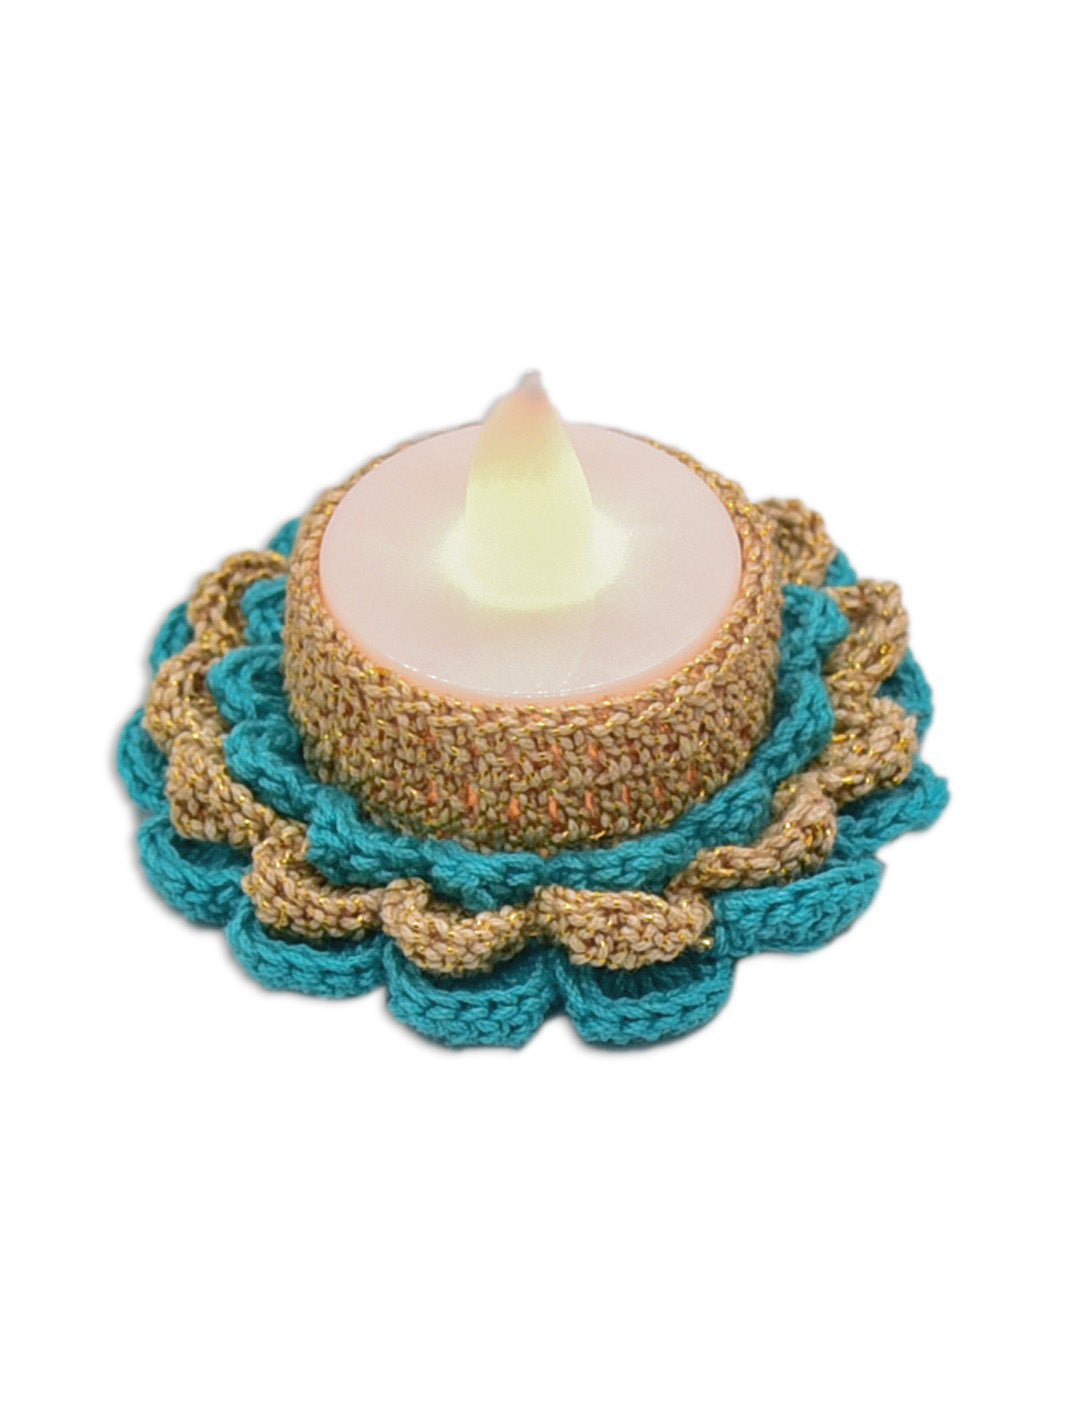 Handcrafted Floral Crochet Tealight- Blue